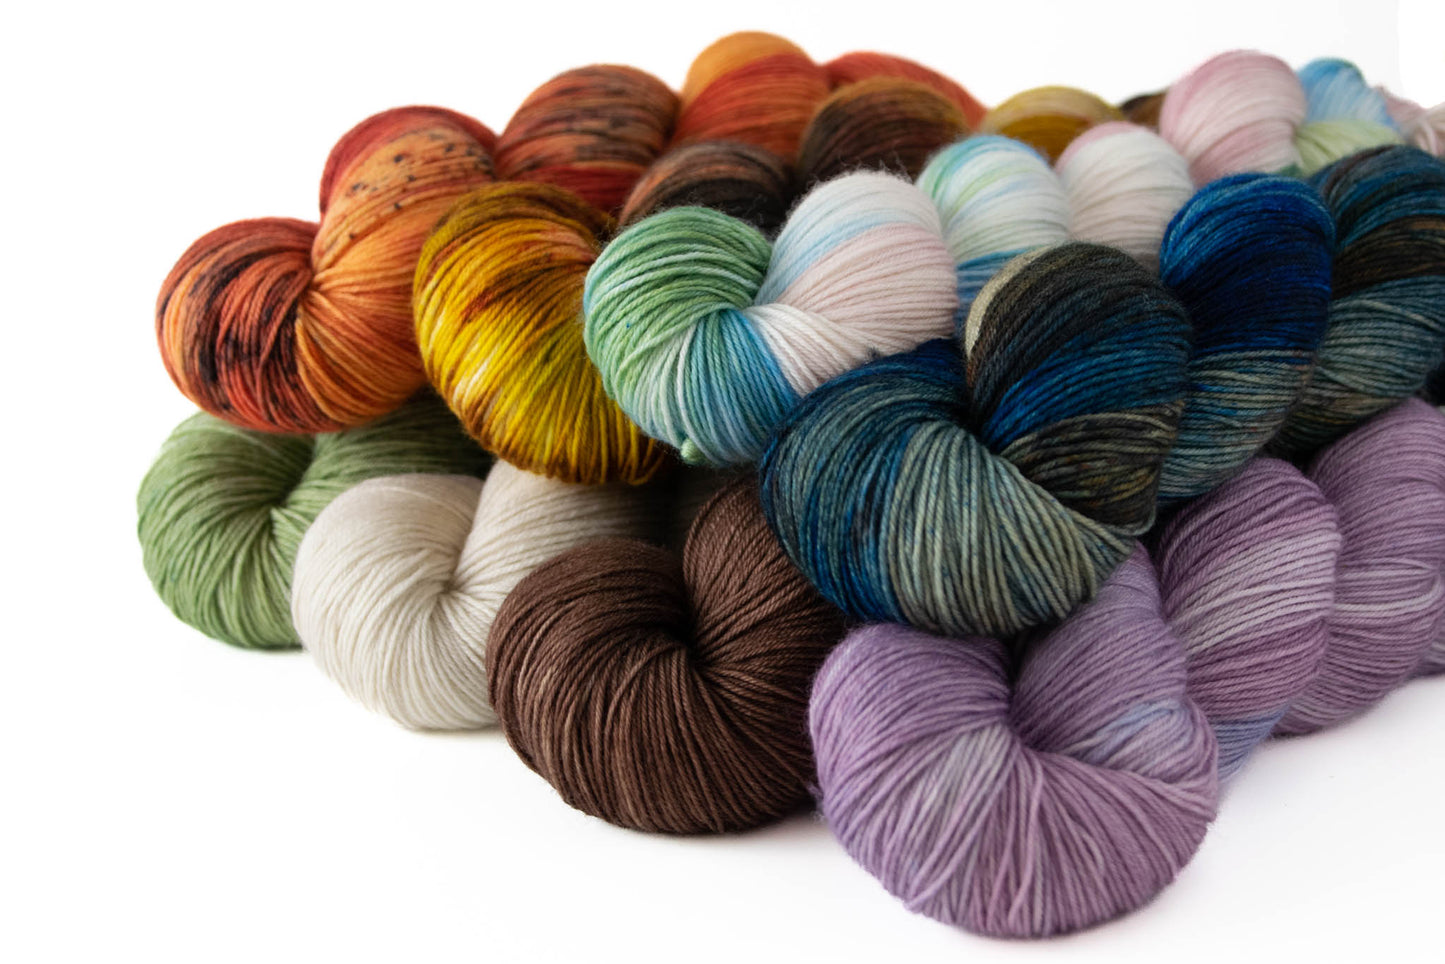 Eight skeins in the collection stacked on top of each other: red and orange; brown and yellow; green, blue, pink, and white; blue, orange, and brown; green; cream; brown; and purple.